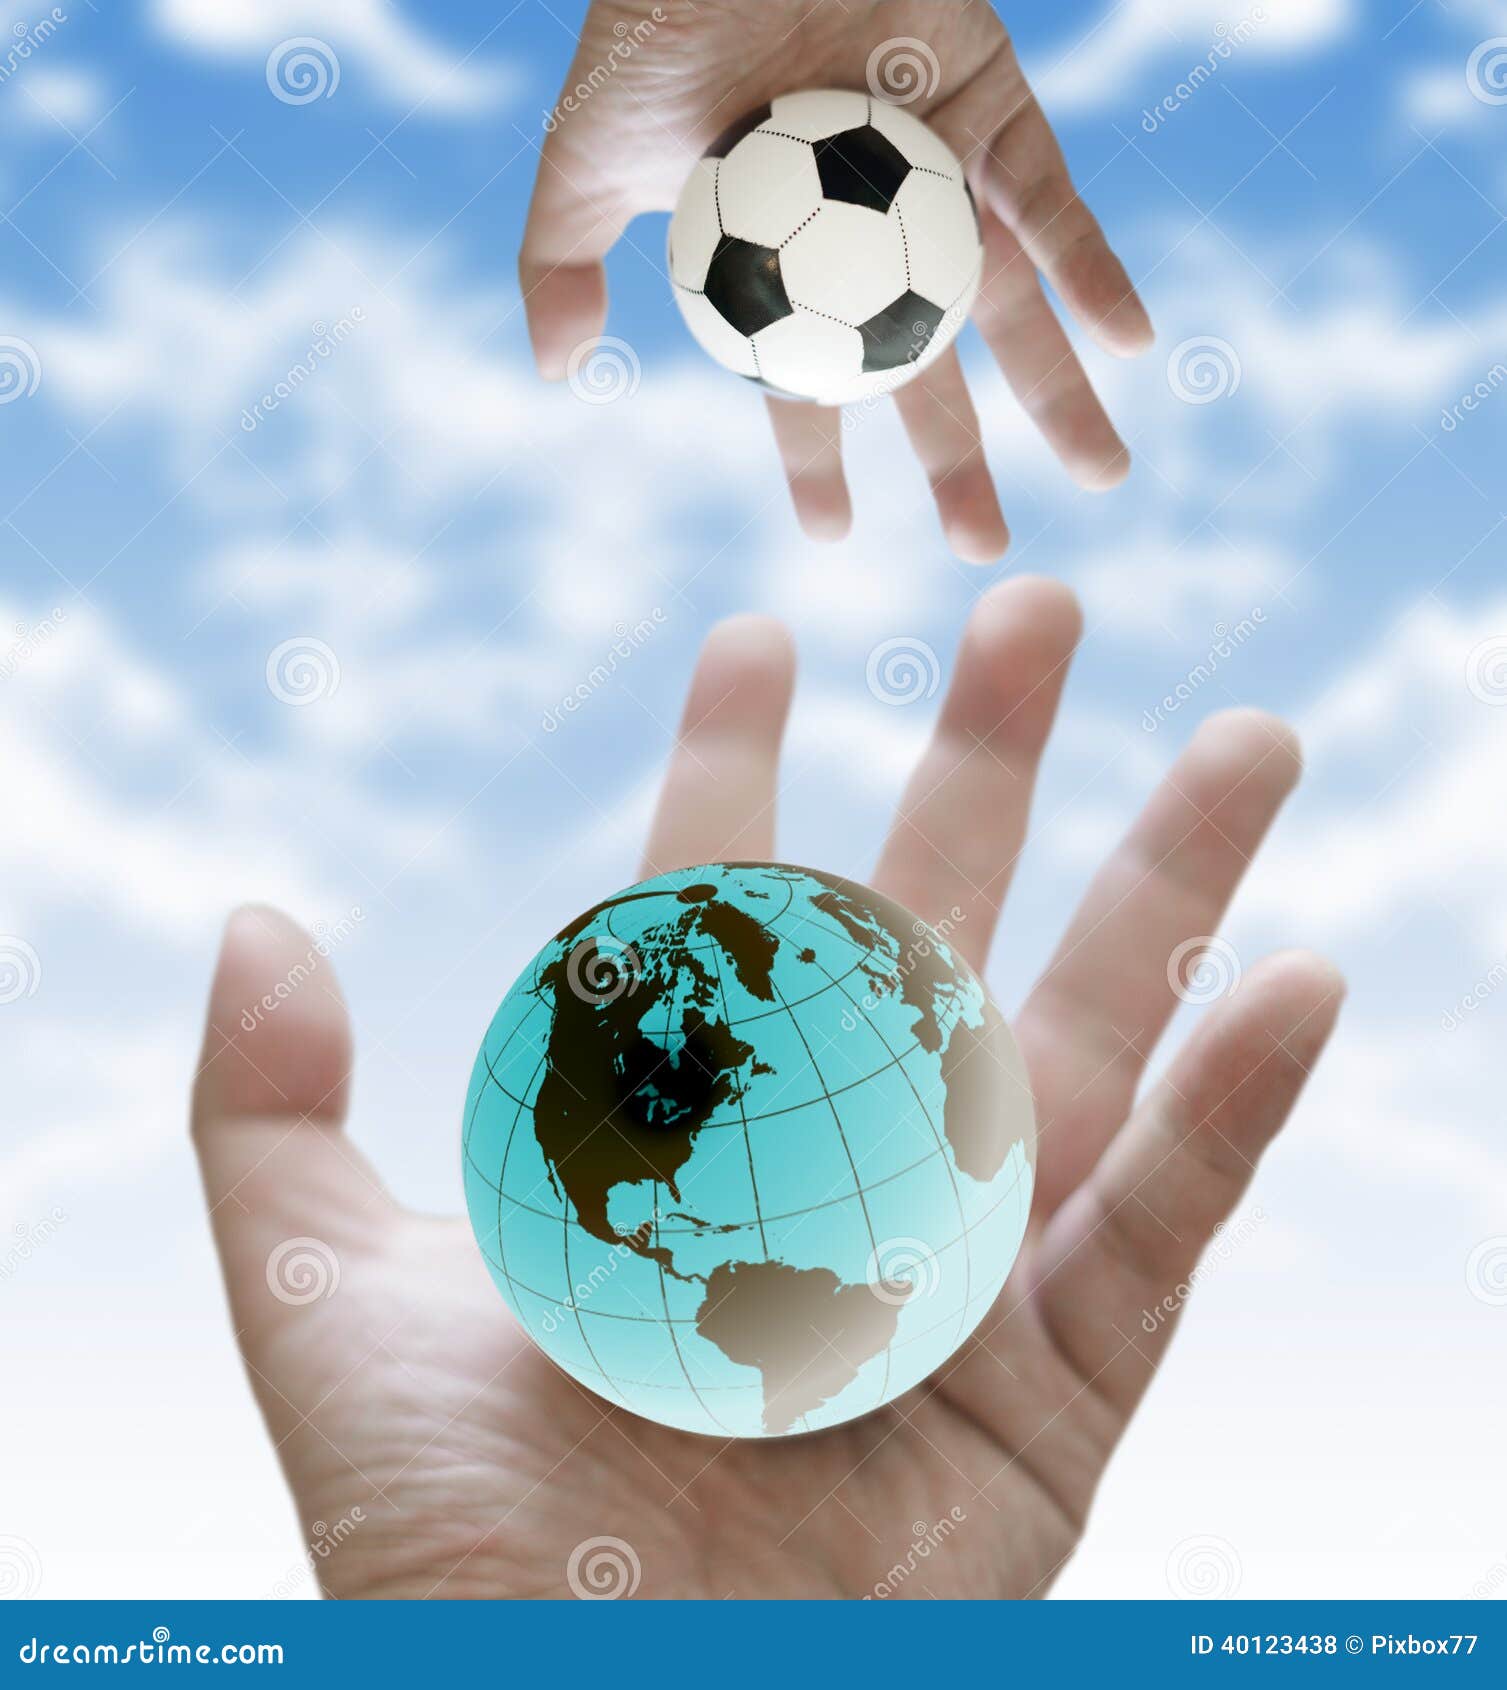 Share Football World Cup Scores Stock Photo